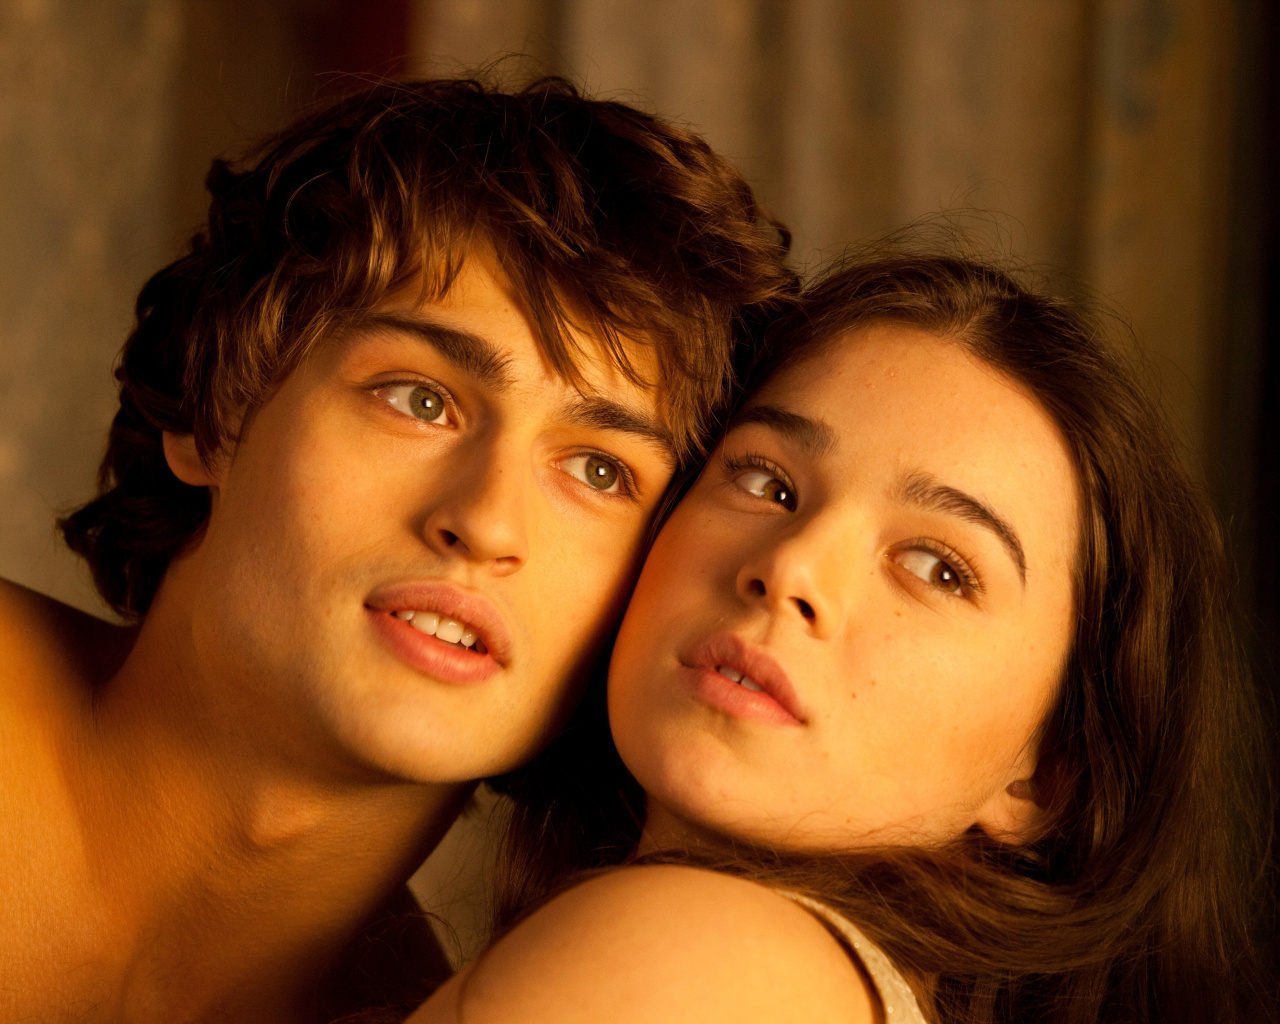 Romeo and Juliet with Hailee Steinfeld and Douglas Booth wallpaper 1280x1024